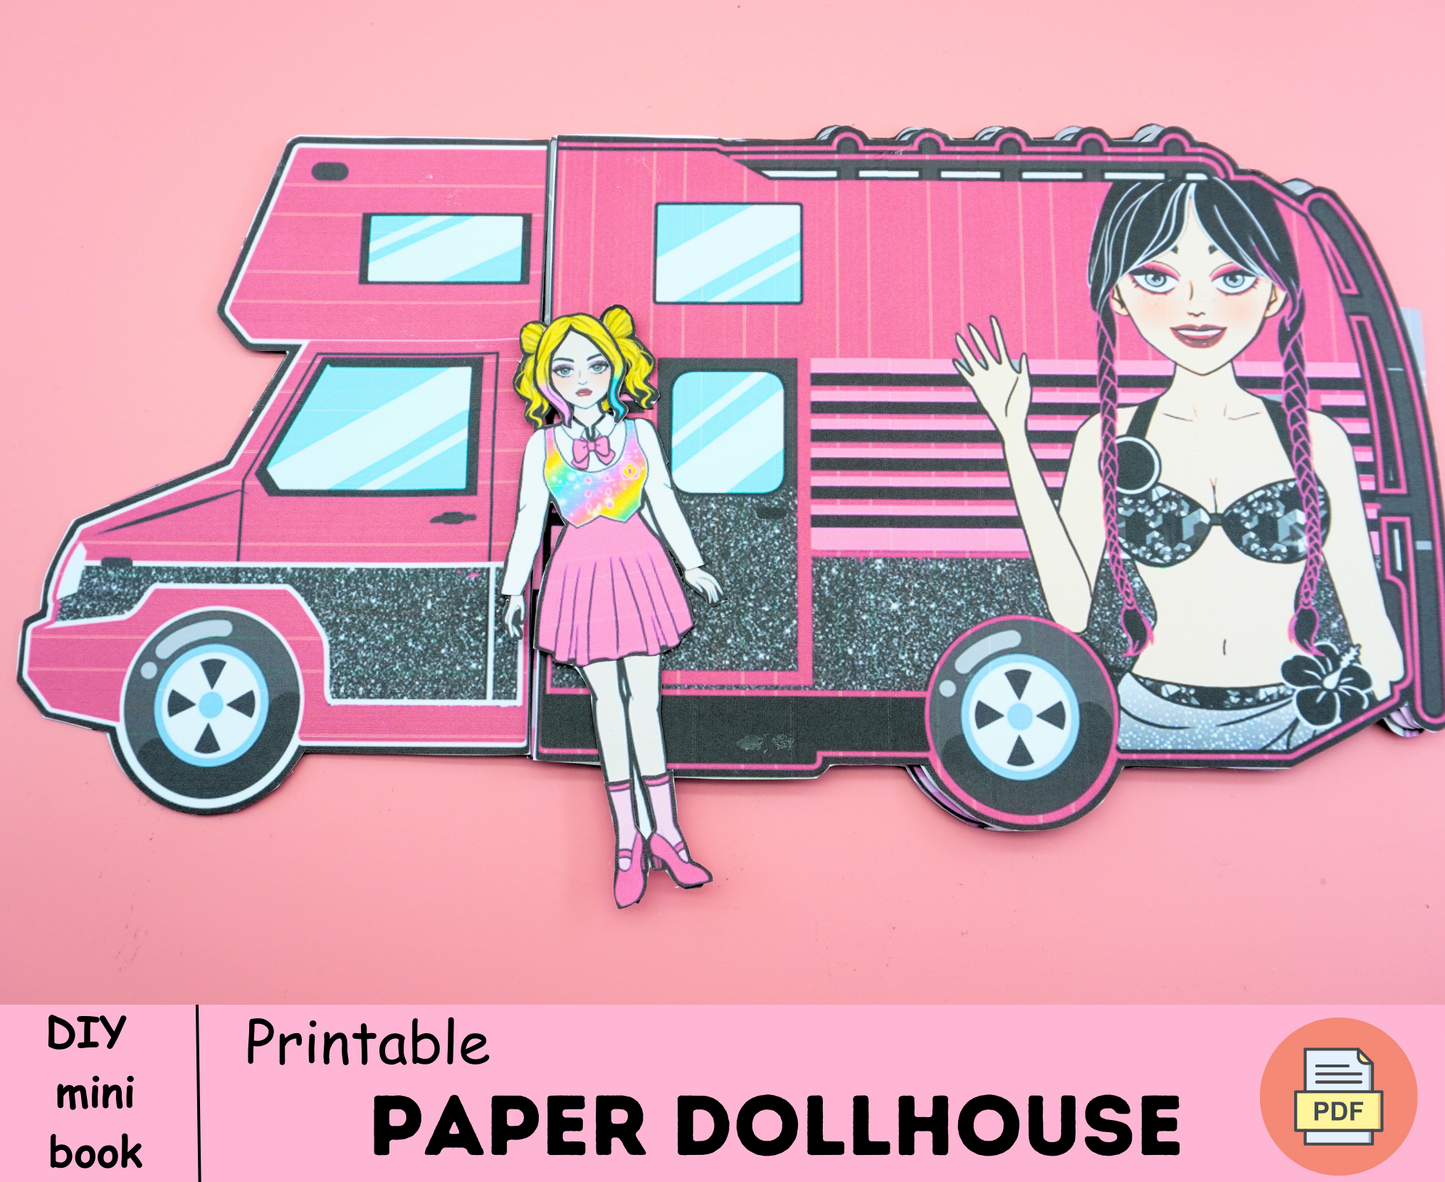 Wednesday Addam Truck Printable Paper Dolls 🌈 Mini Pink DIY Busy Book printable for toddler | Handmade Dollhouse | Montessori busy book🌈 Woa Doll Crafts